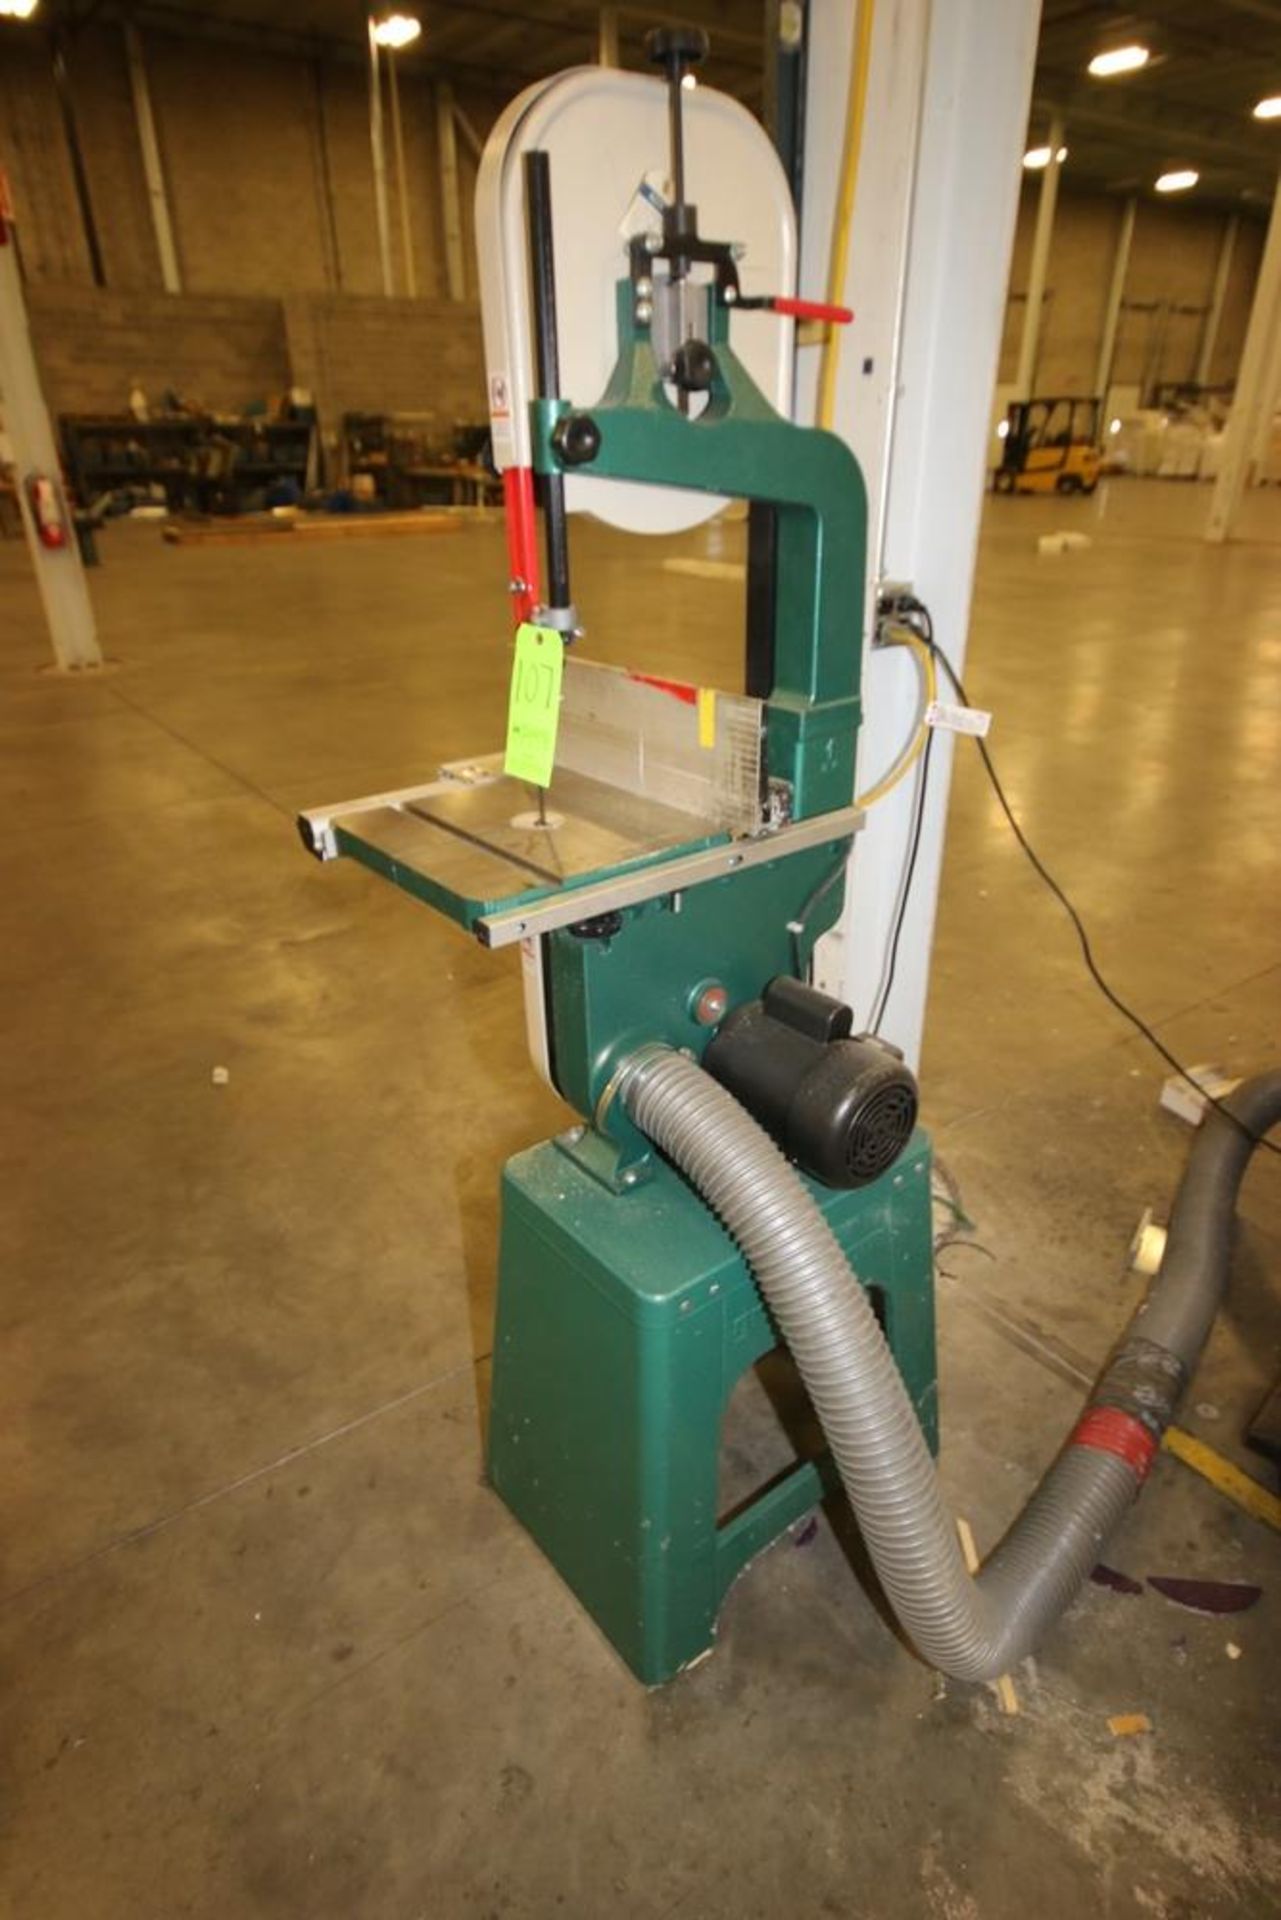 2011 Grizzly Vertical Band Saw, S/N 1102019, with 14" x 14" Table, with 1 hp Motor, 110/120 Volts, - Image 3 of 5